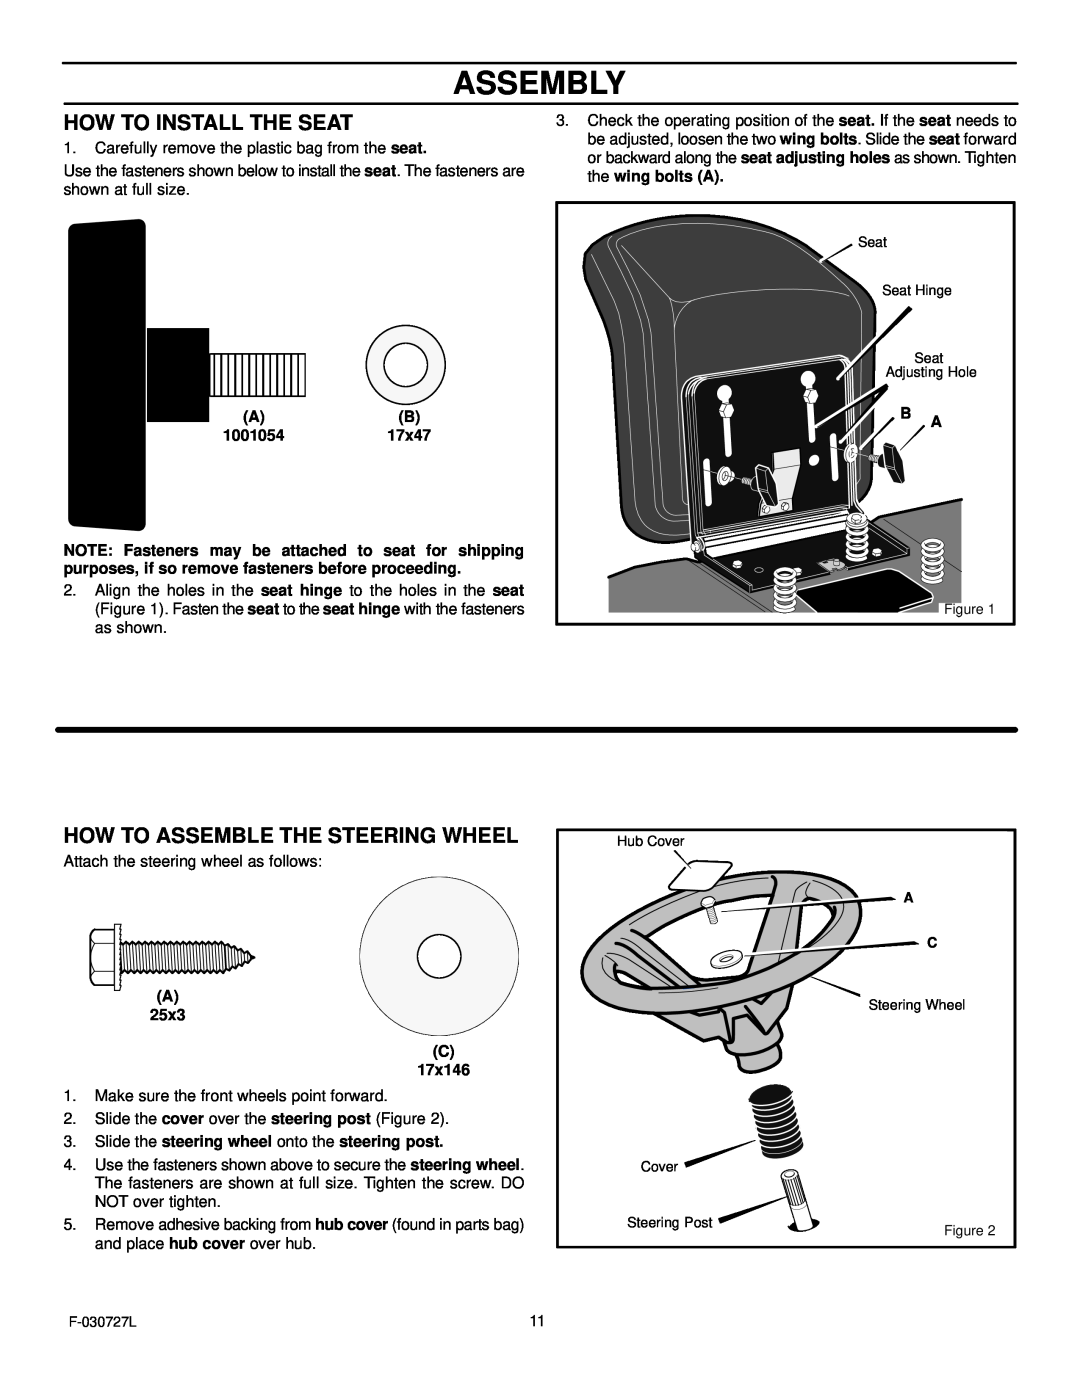 Murray 465600x8A manual Assembly, How To Install The Seat, How To Assemble The Steering Wheel, Ab, A 25x3 C 